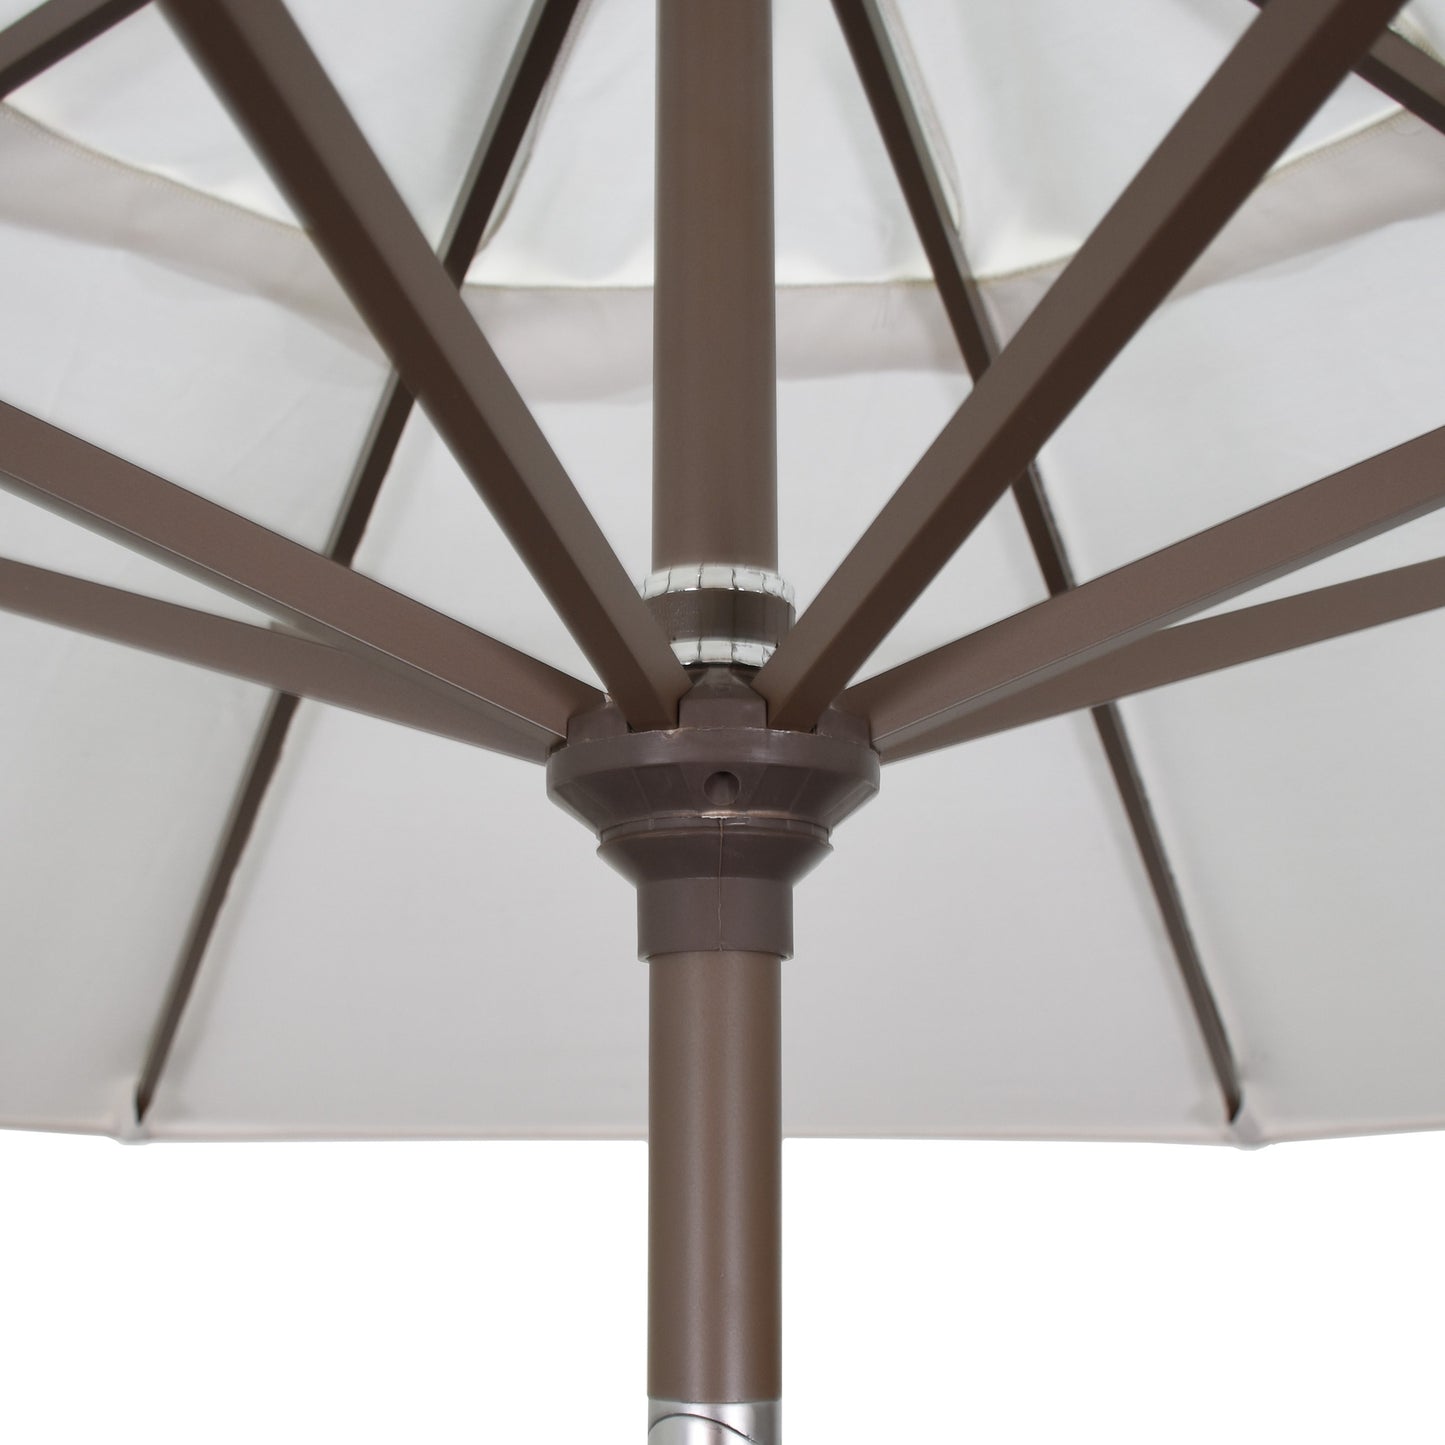 9' Market Style Outdoor Umbrella with Wind Vent Dolce Oasis